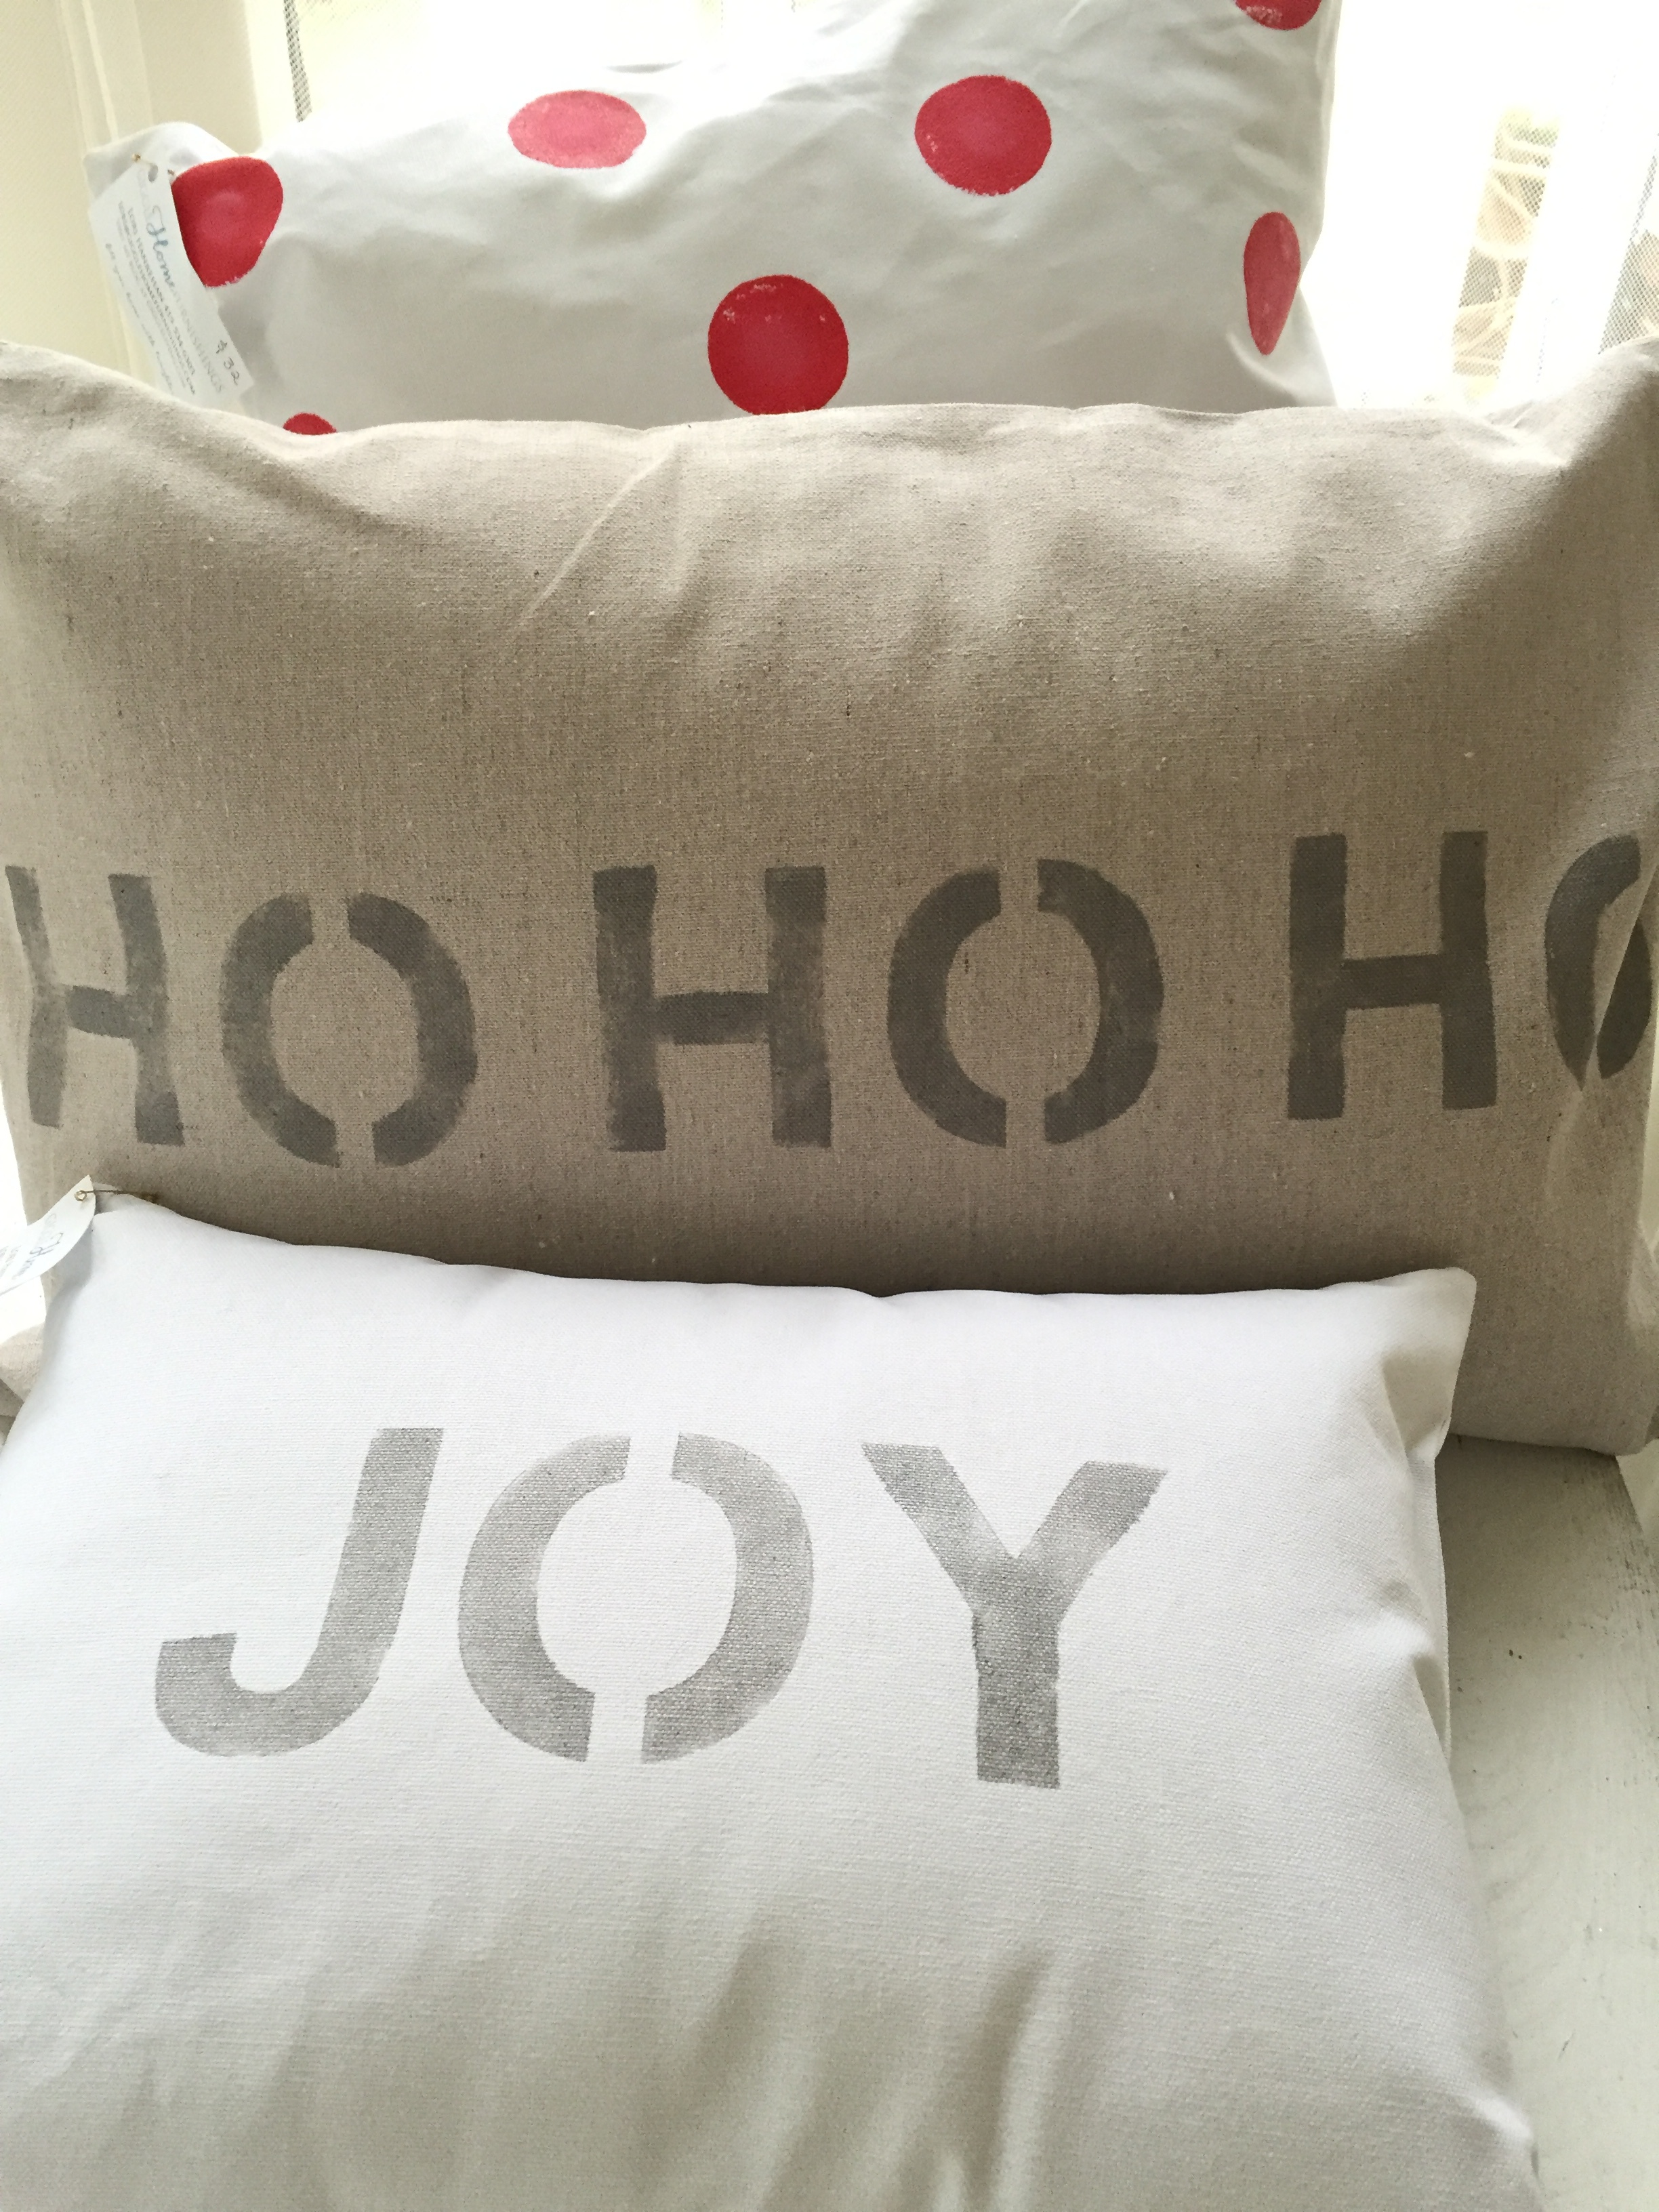 Giggle hand-painted pillows